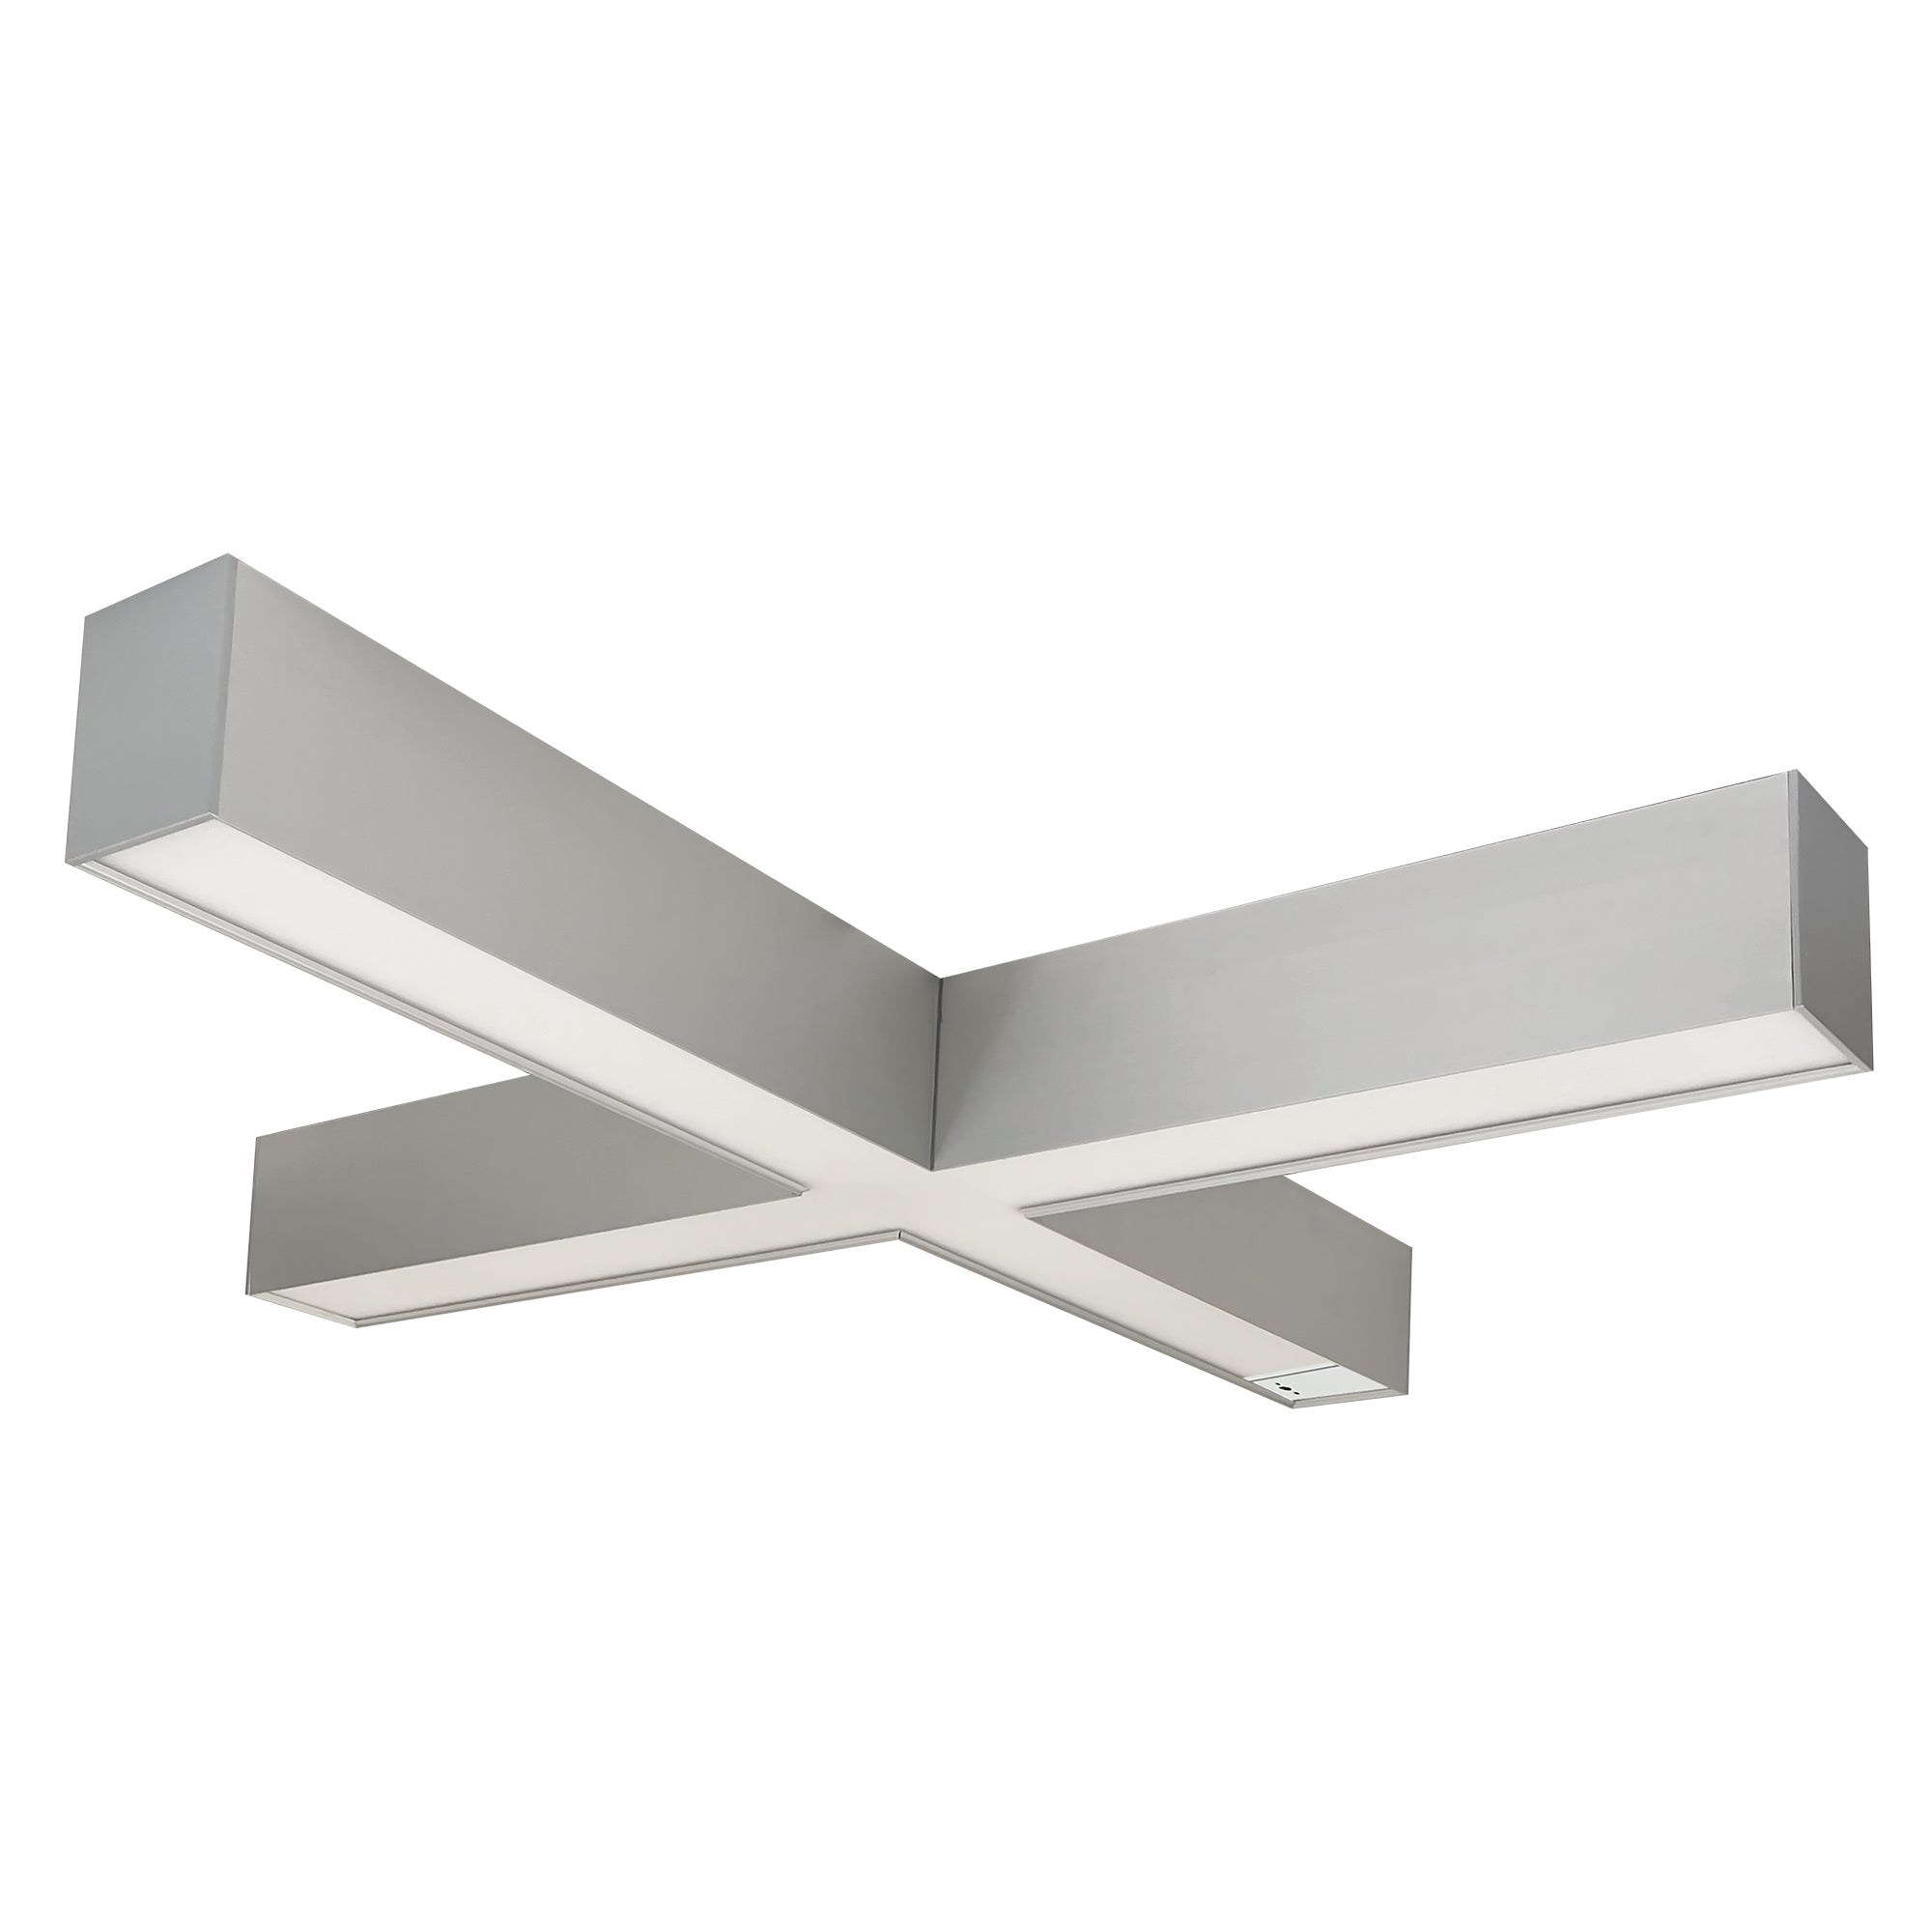 Nora Lighting NLUD-X334A/OS - Linear -  InchX Inch Shaped L-Line LED Indirect/Direct Linear, 6028lm / Selectable CCT, Aluminum finish, with Motion Sensor